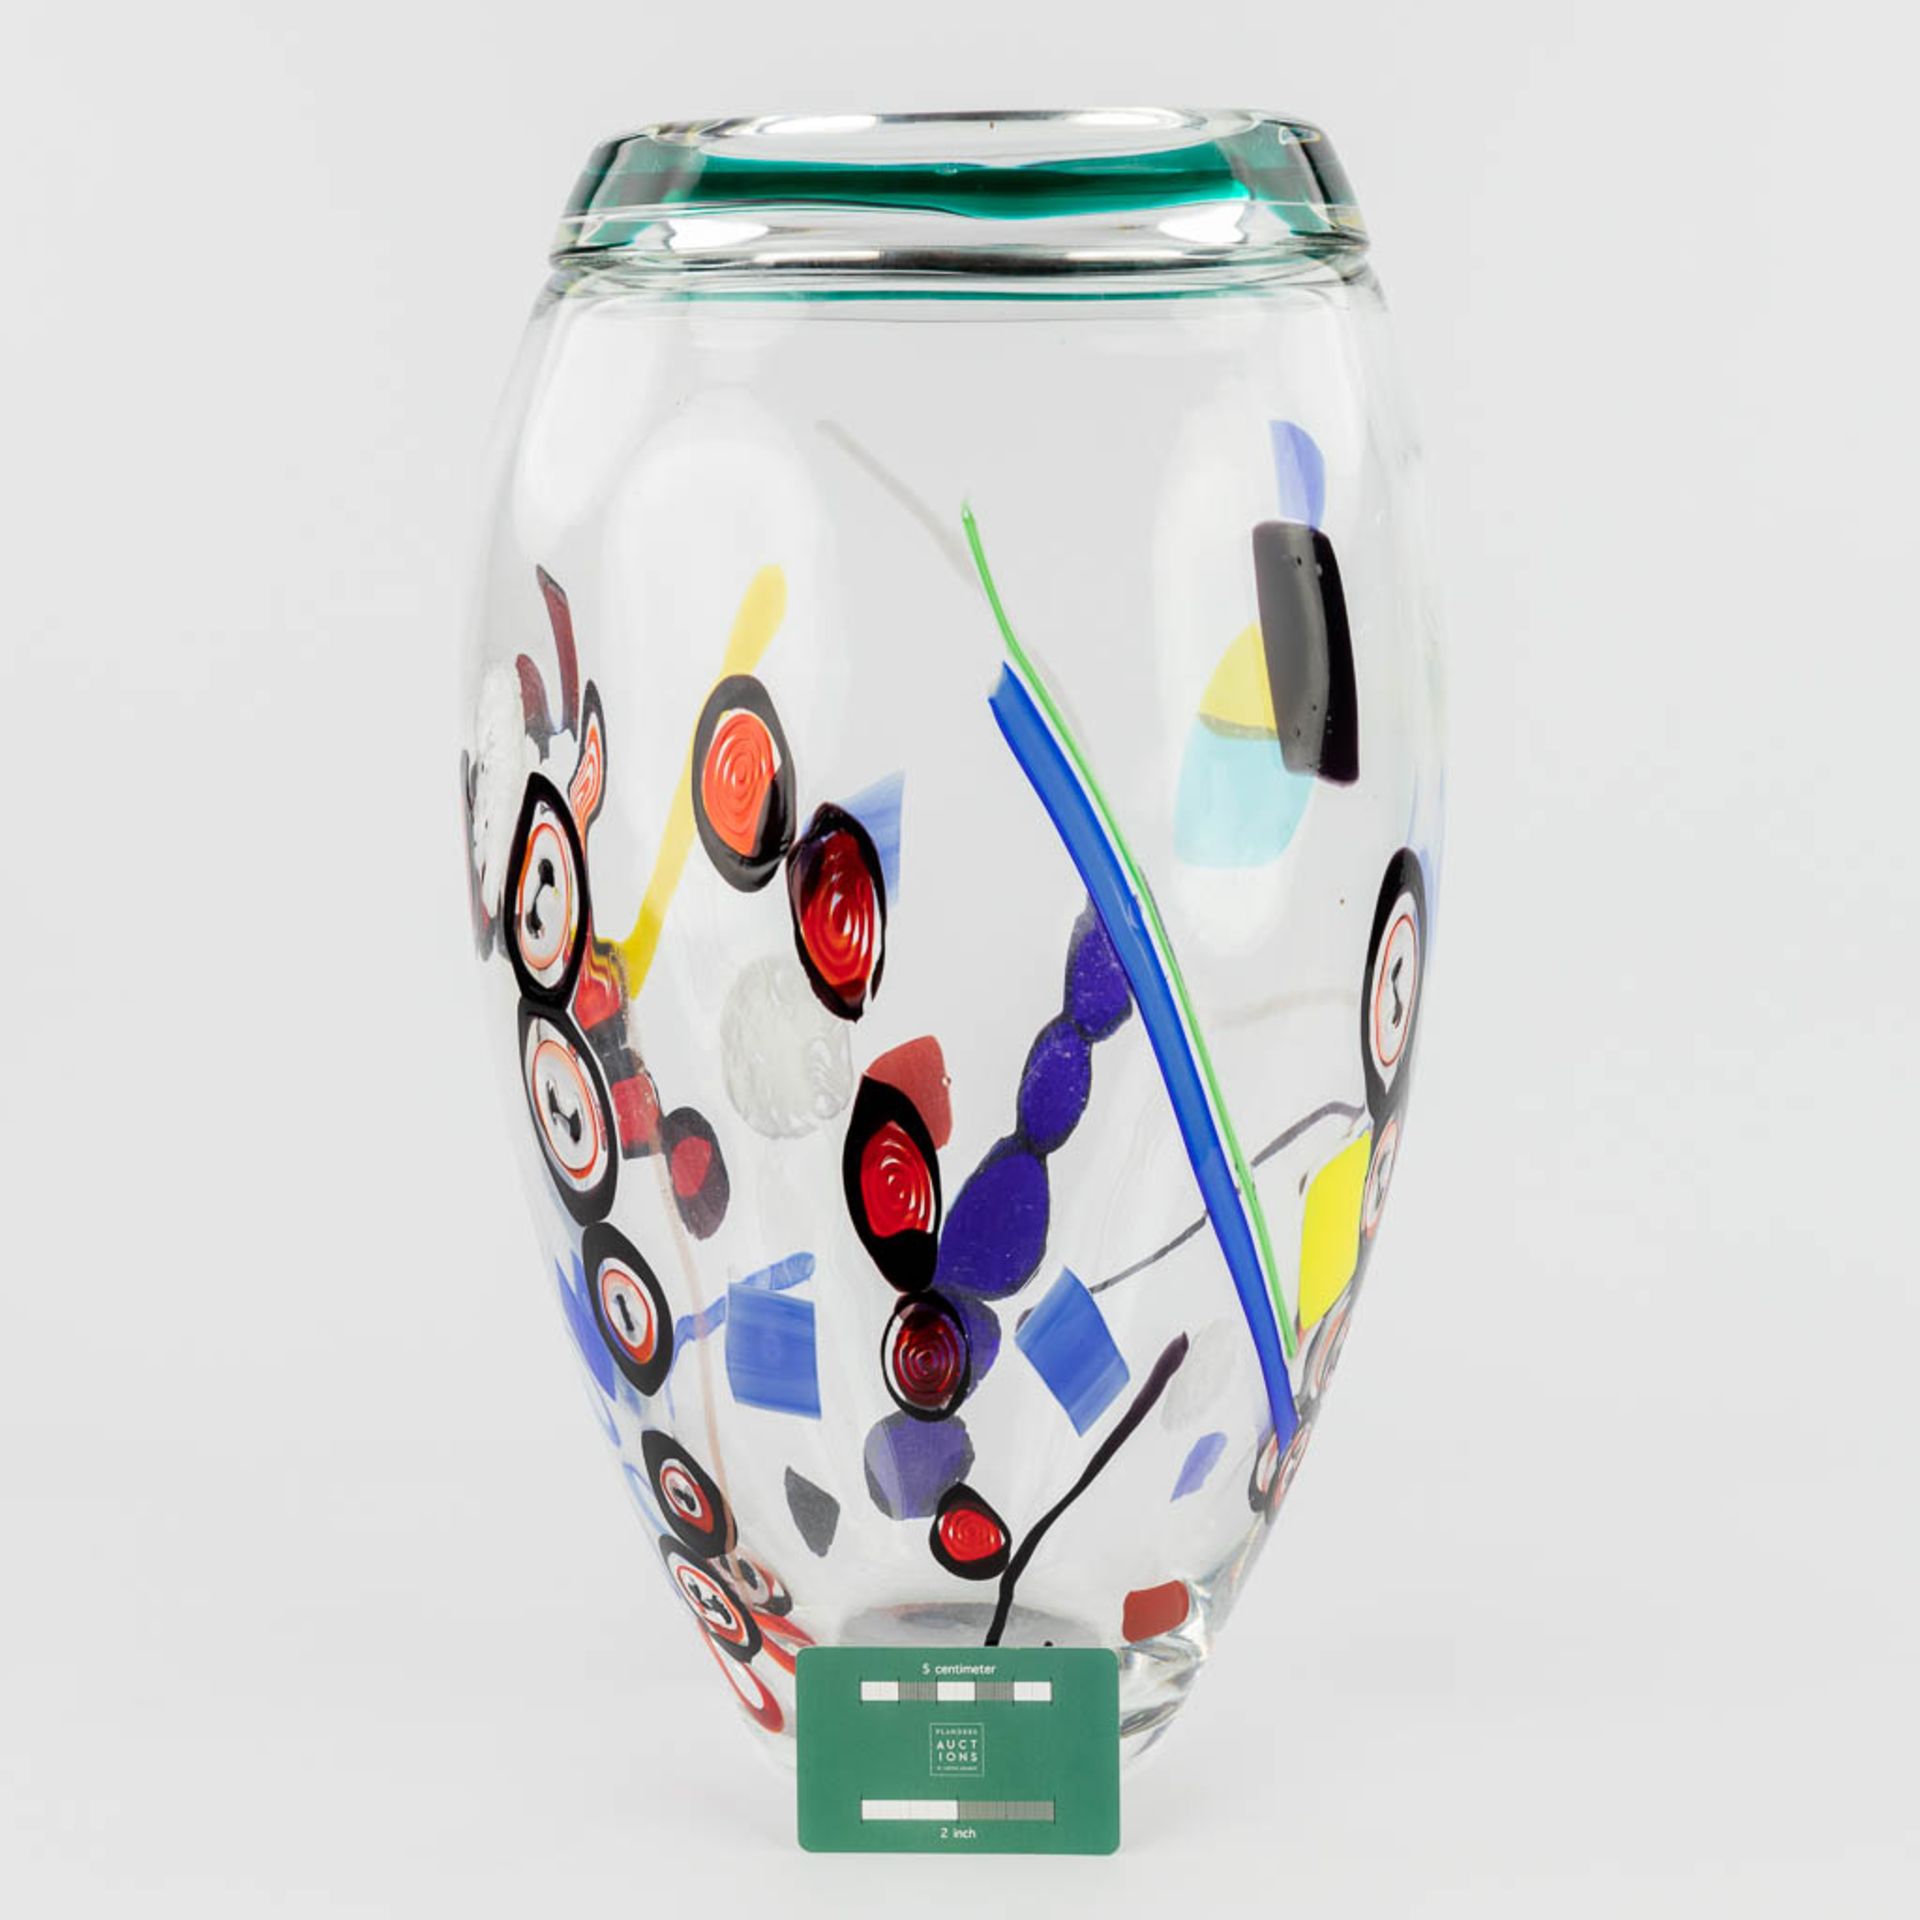 Seguso e Barovier, a large vase, glass art and made in Murano, Italy. (L: 23 x W: 27 x H: 45 cm) - Image 2 of 17